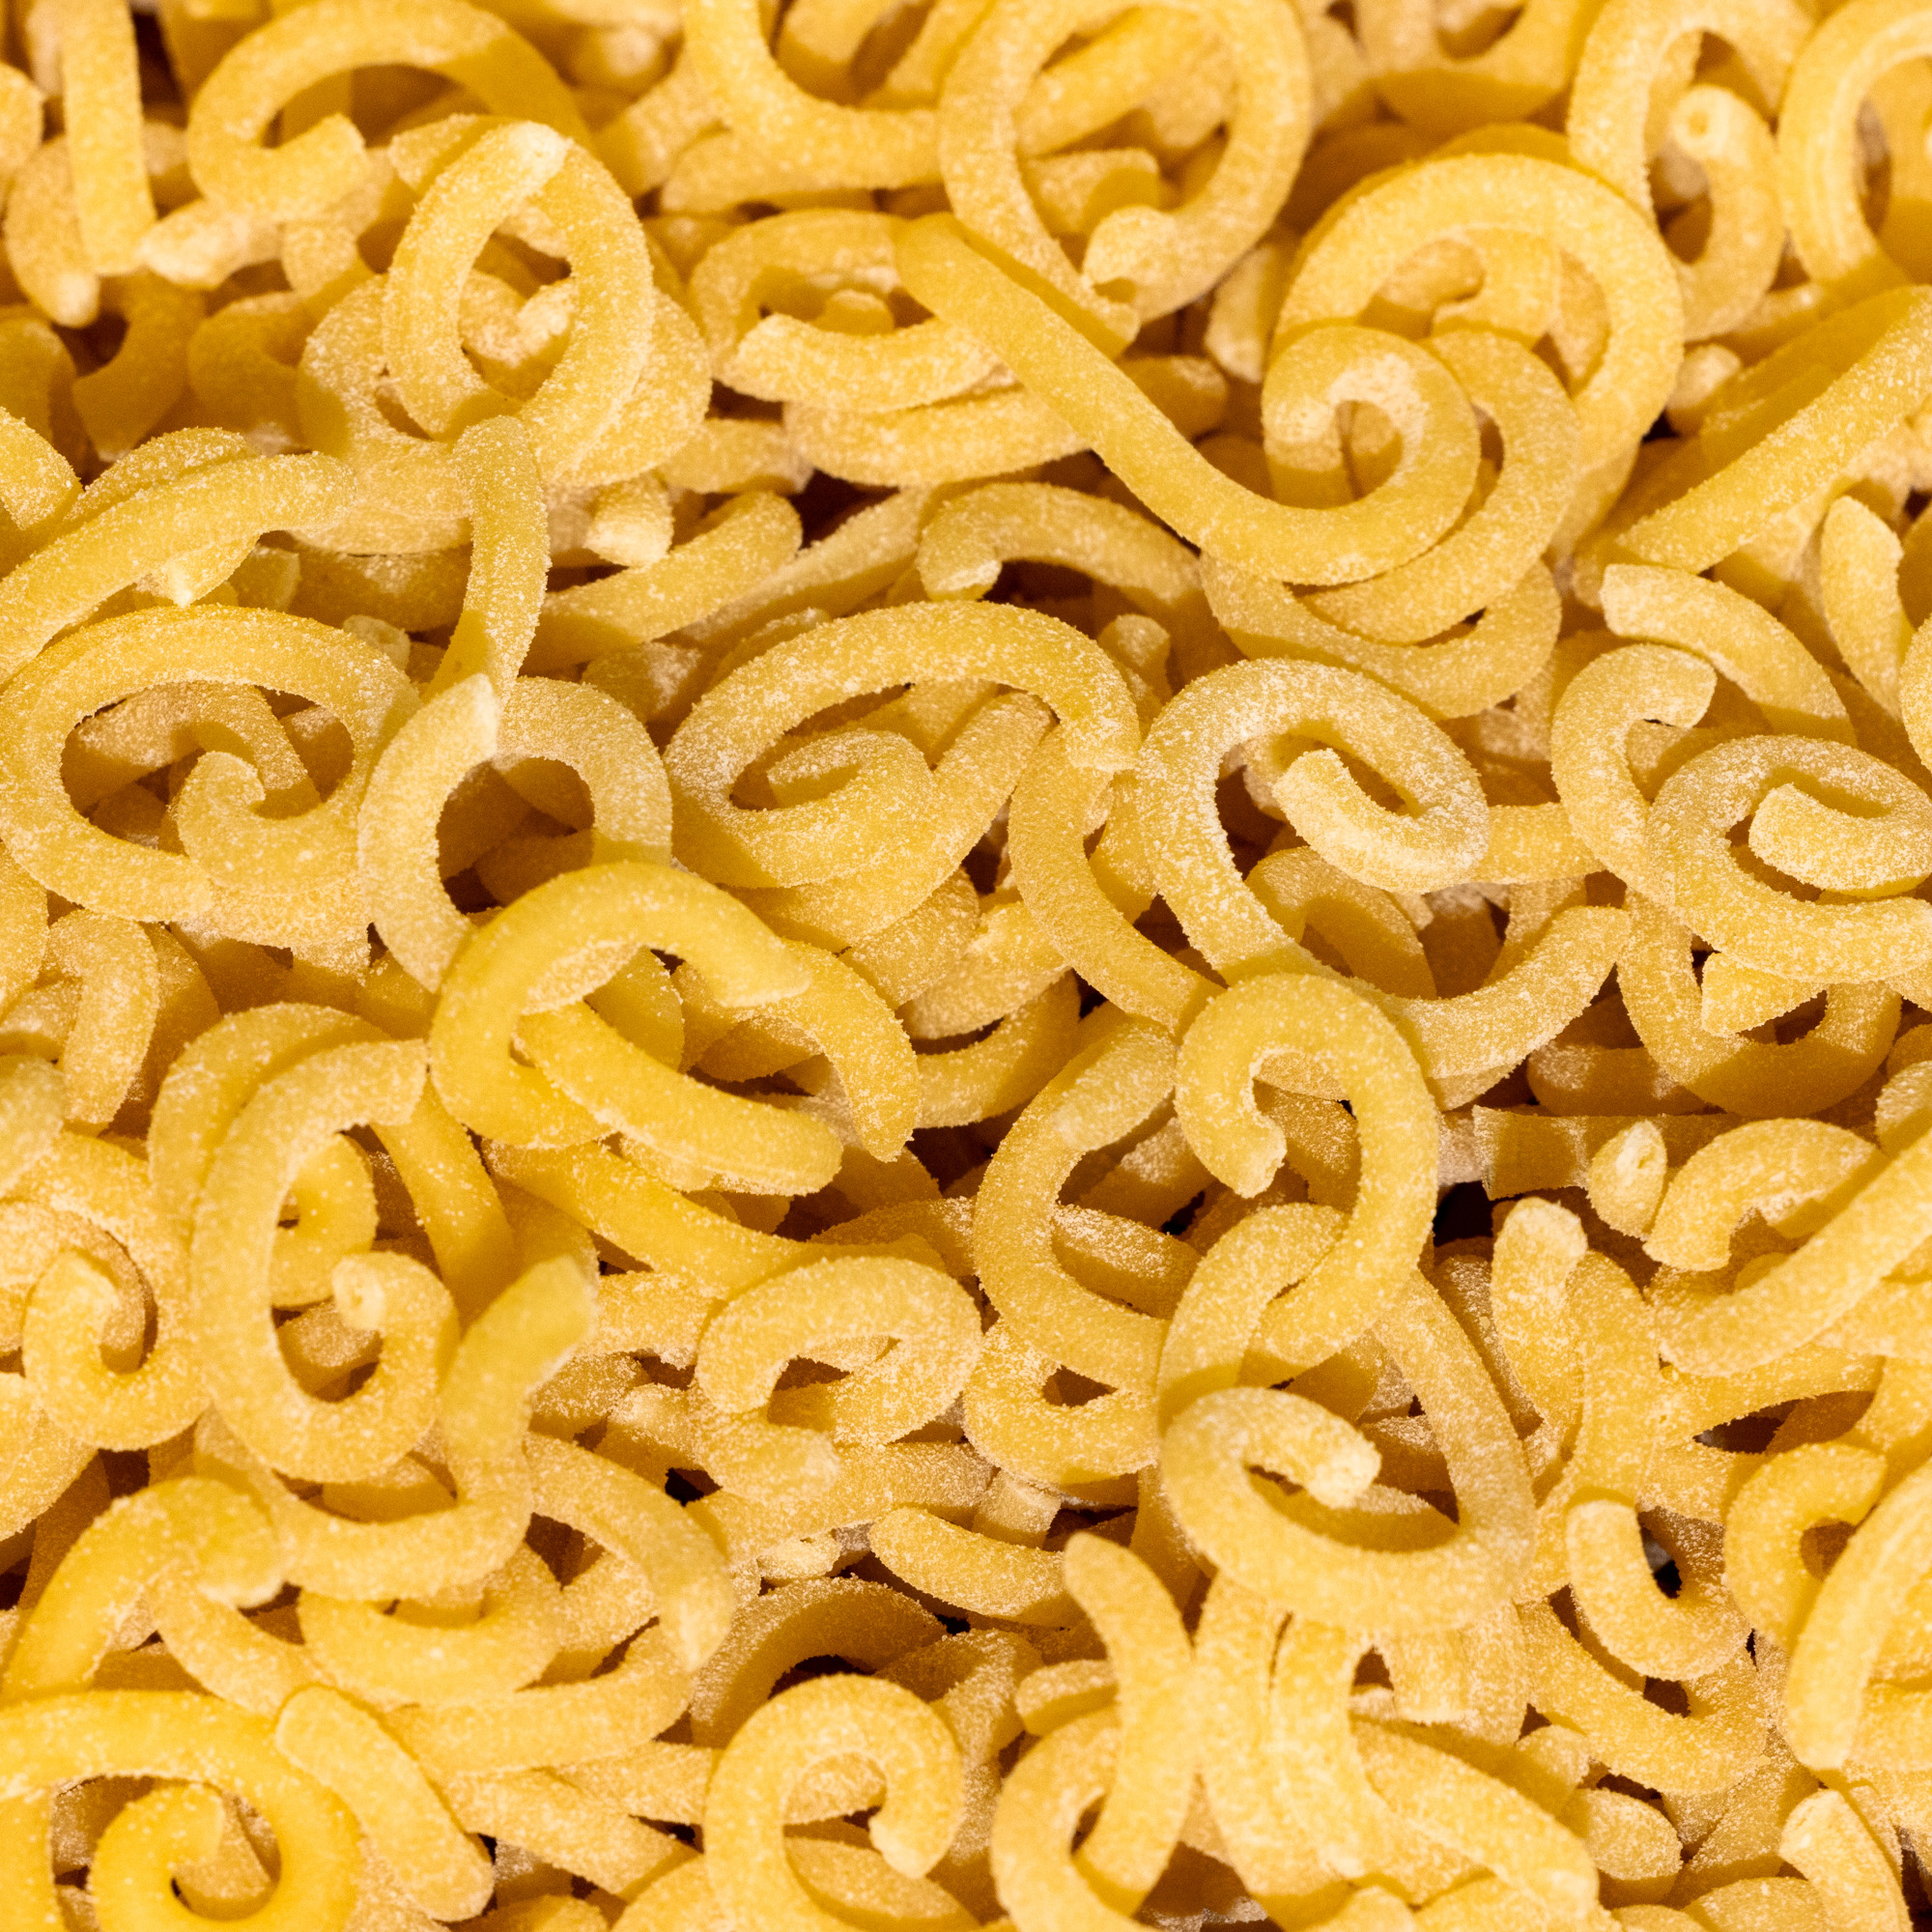 The image shows a close-up of uncooked, curly-shaped pasta, with a yellow-golden color and a lightly dusted surface. The pieces are irregularly twisted.